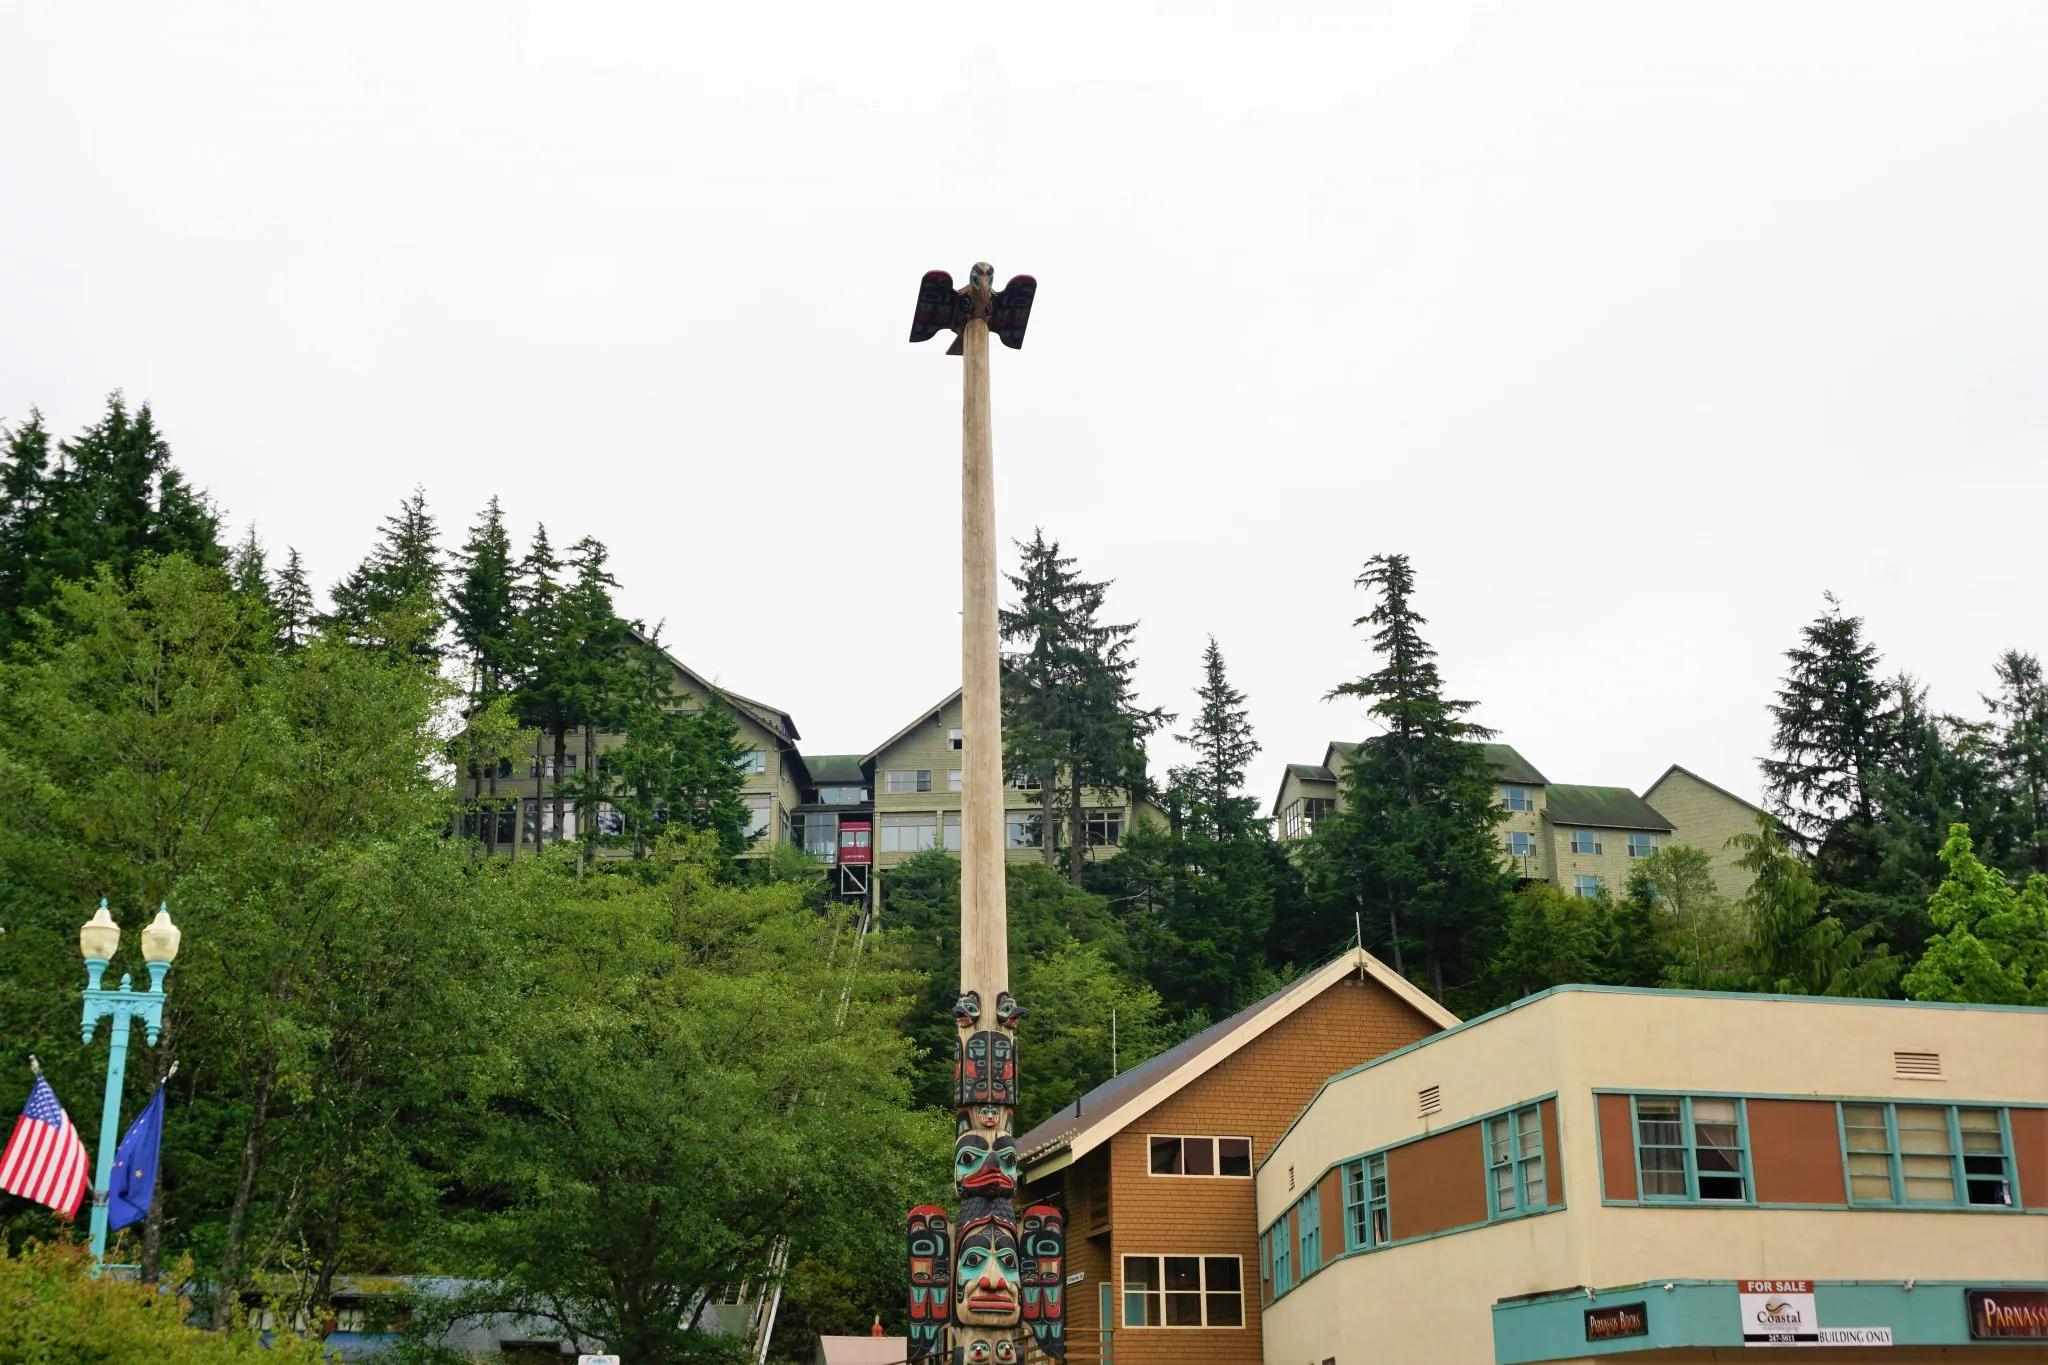 Top Things to Do in Ketchikan, Alaska on a Cruise